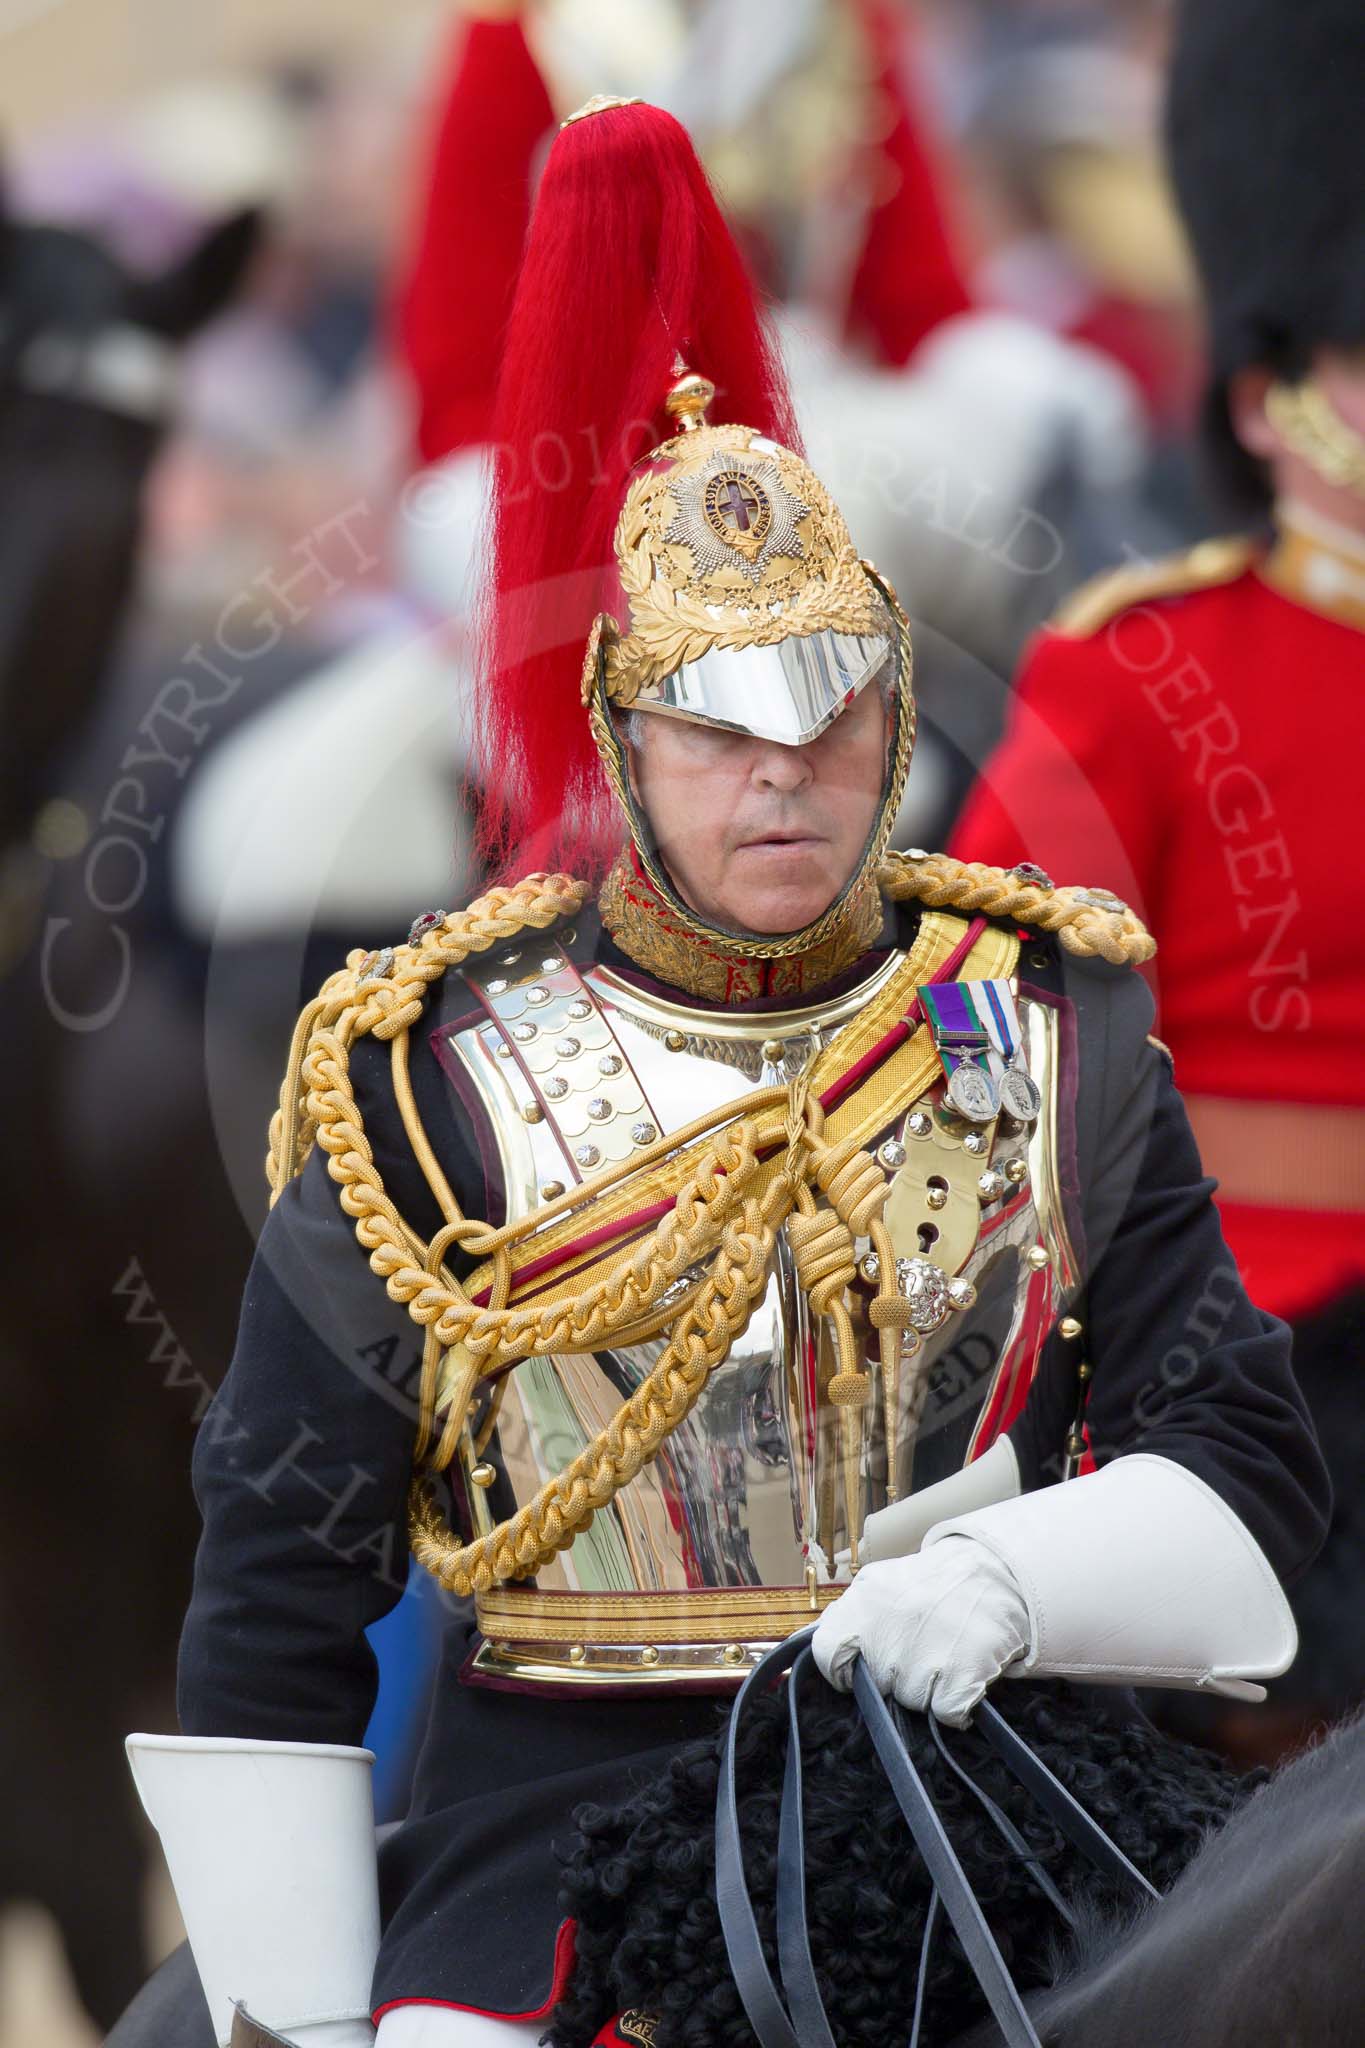 Trooping the Colour 2010: Lieutenant Colonel J S Olivier, The Blues and Royals, Silver Stick Adjutant..
Horse Guards Parade, Westminster,
London SW1,
Greater London,
United Kingdom,
on 12 June 2010 at 11:02, image #76